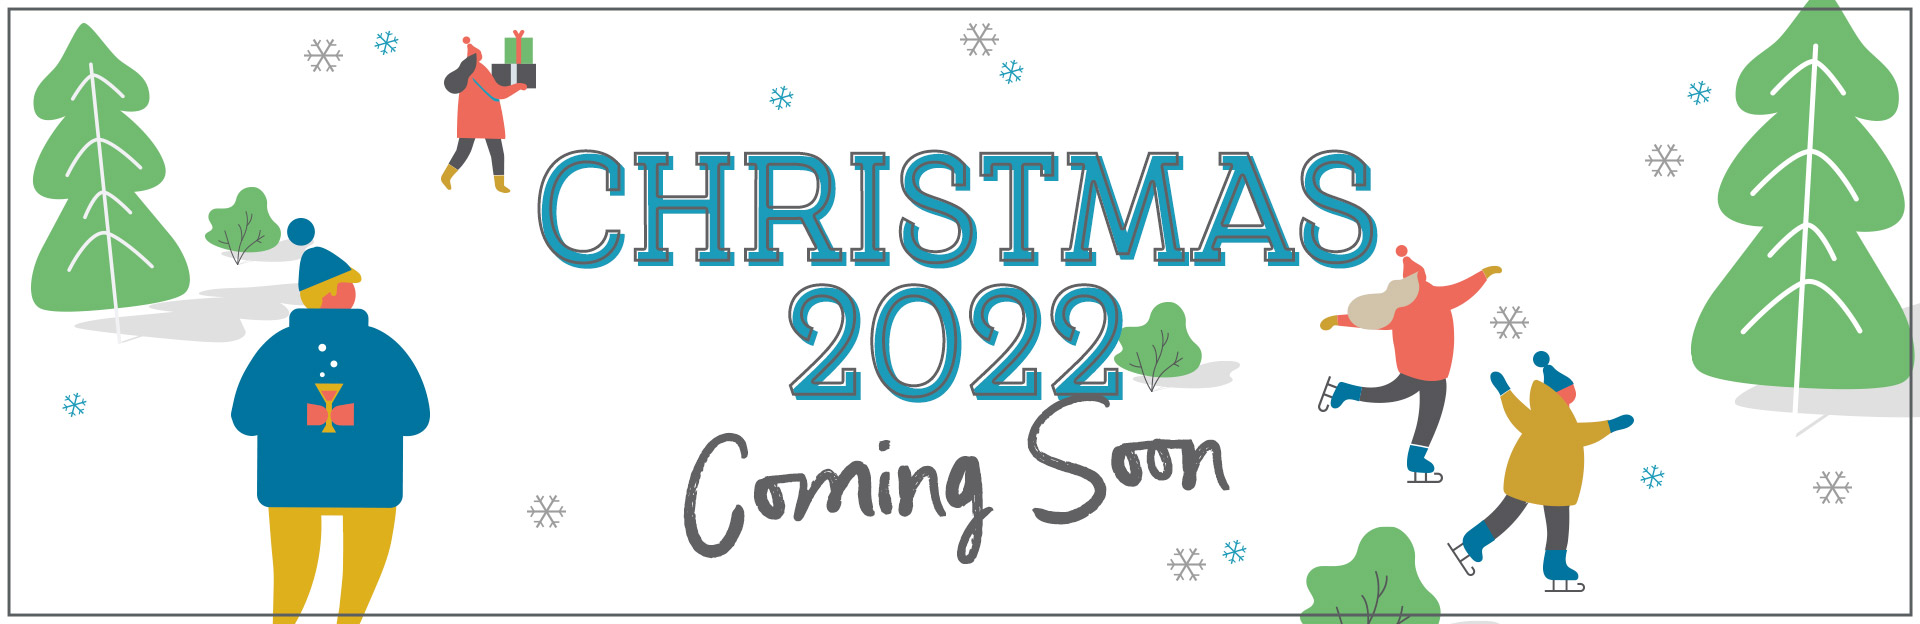 New Christmas Day Menu 2021 | The Pig & Whistle